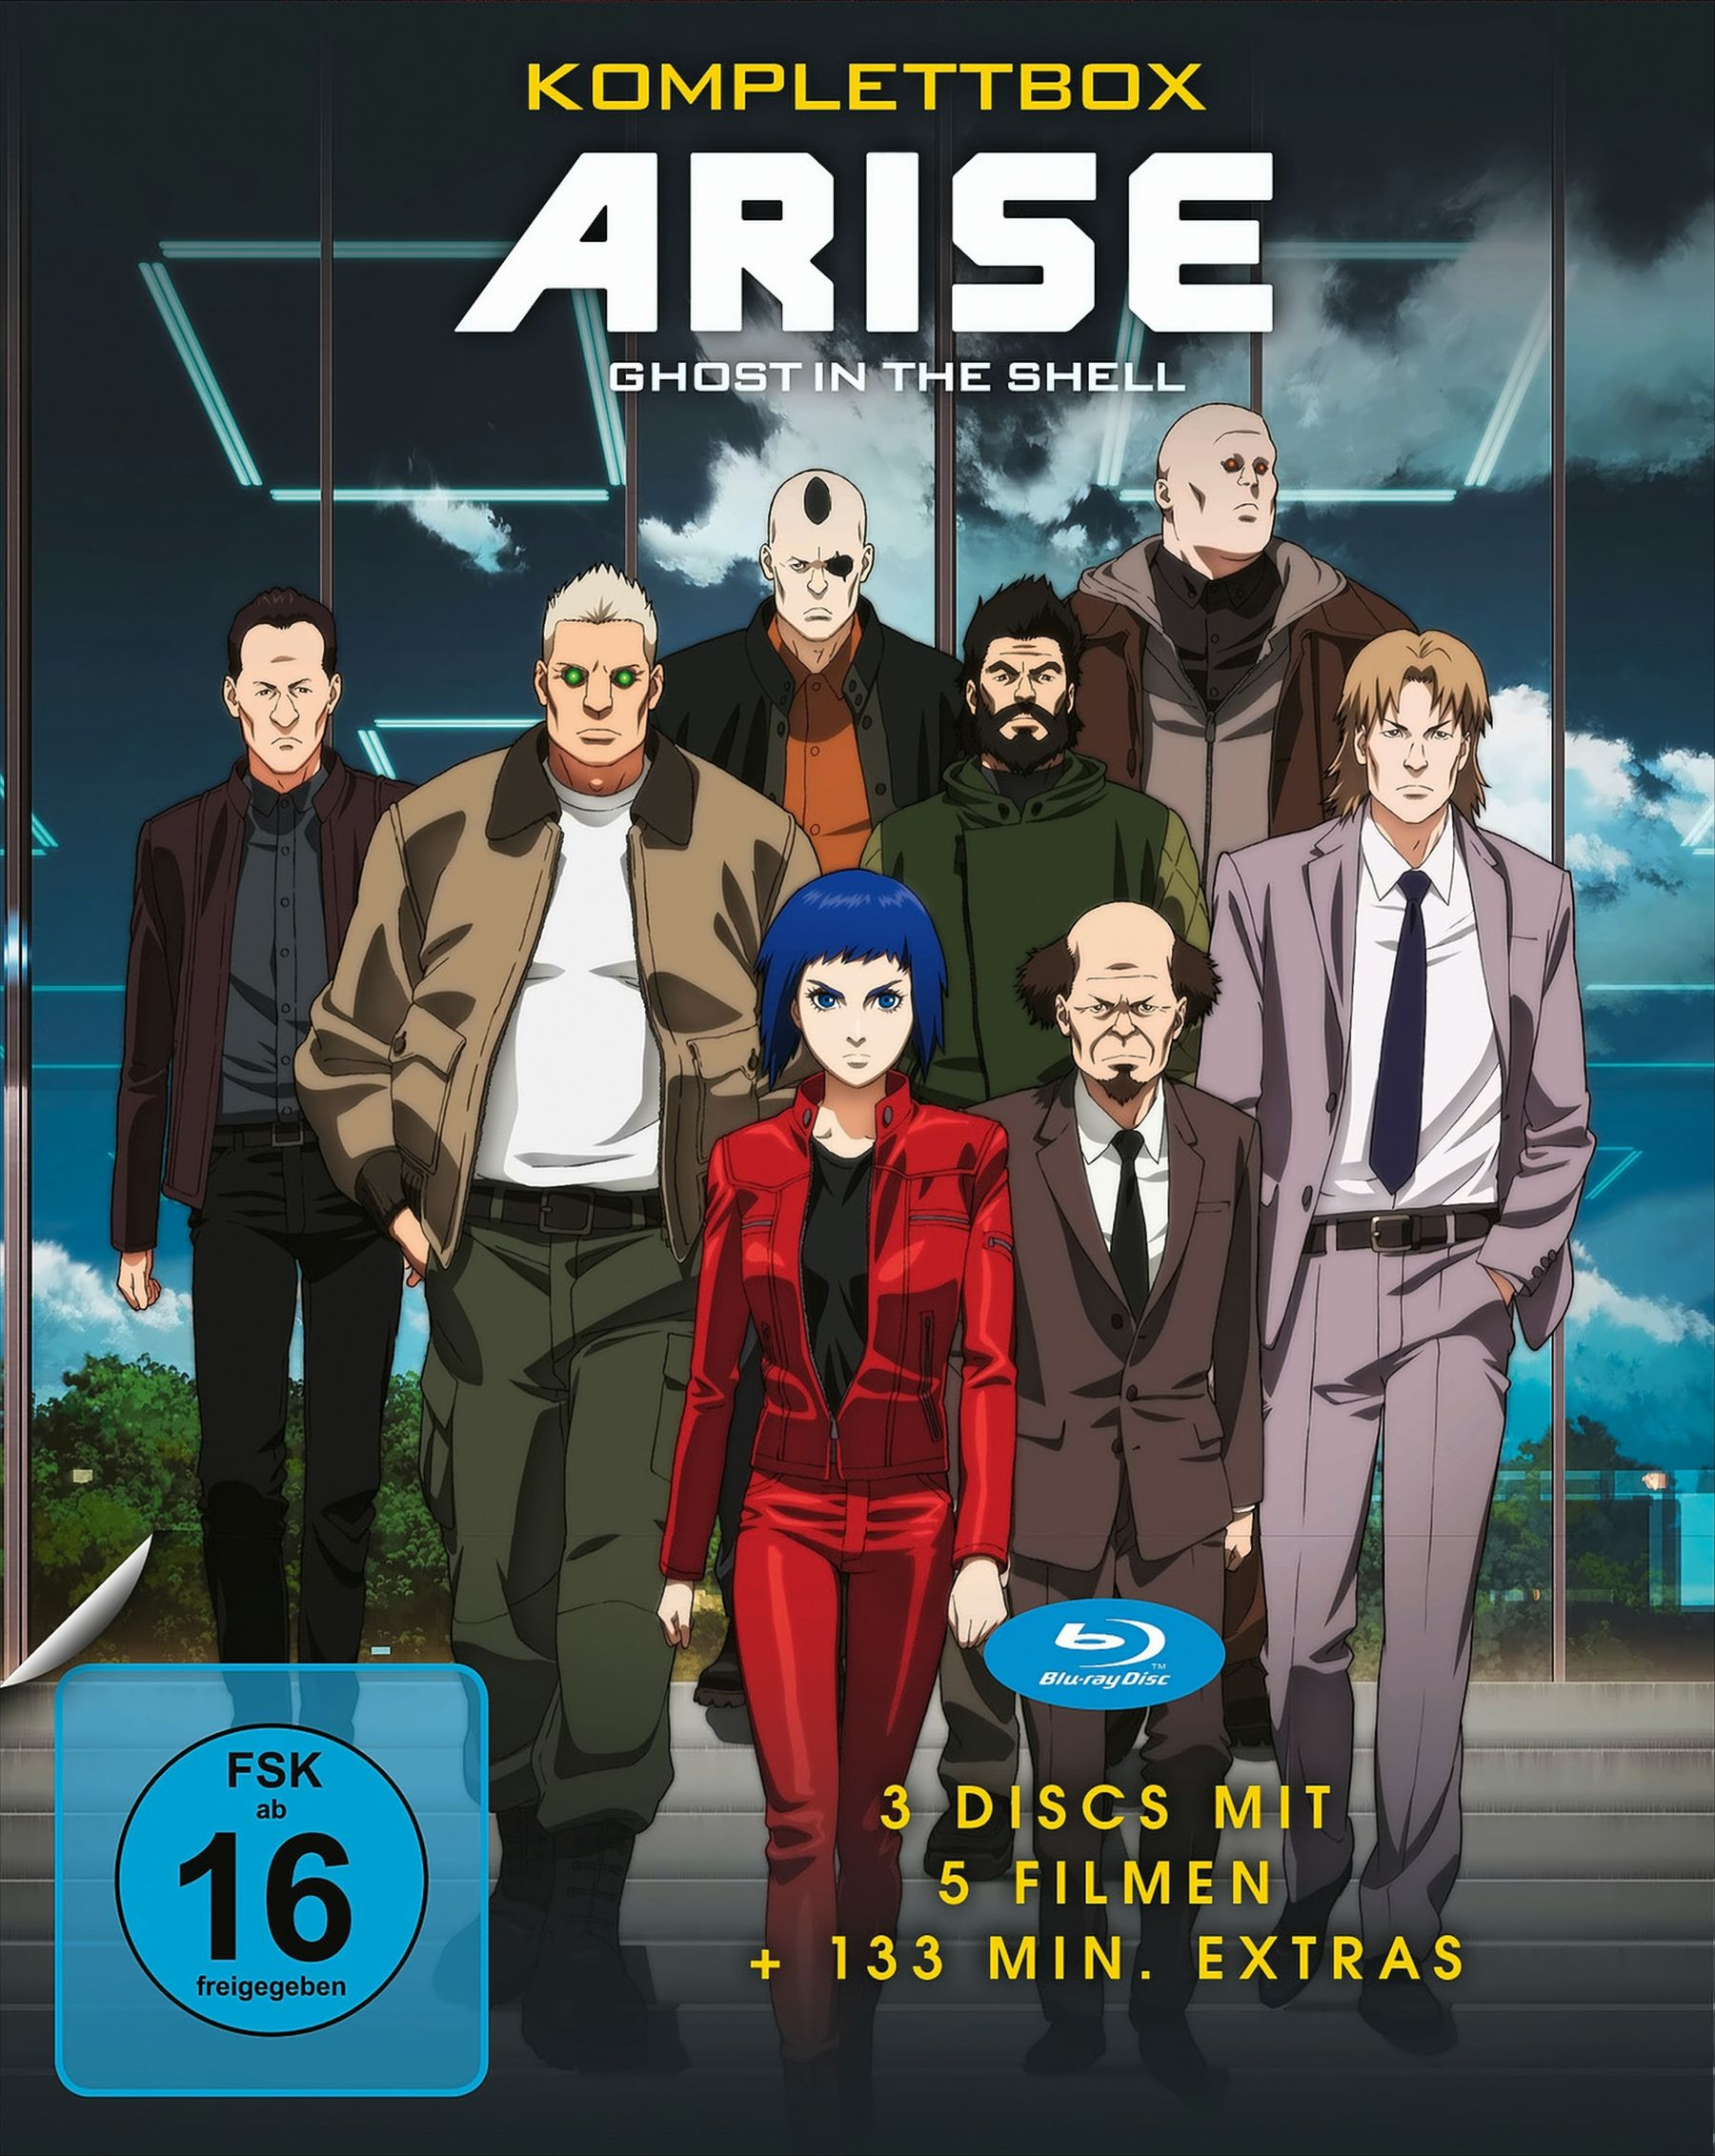 (3 Komplettbox Shell Discs) - Blu-ray Ghost the in Arise: